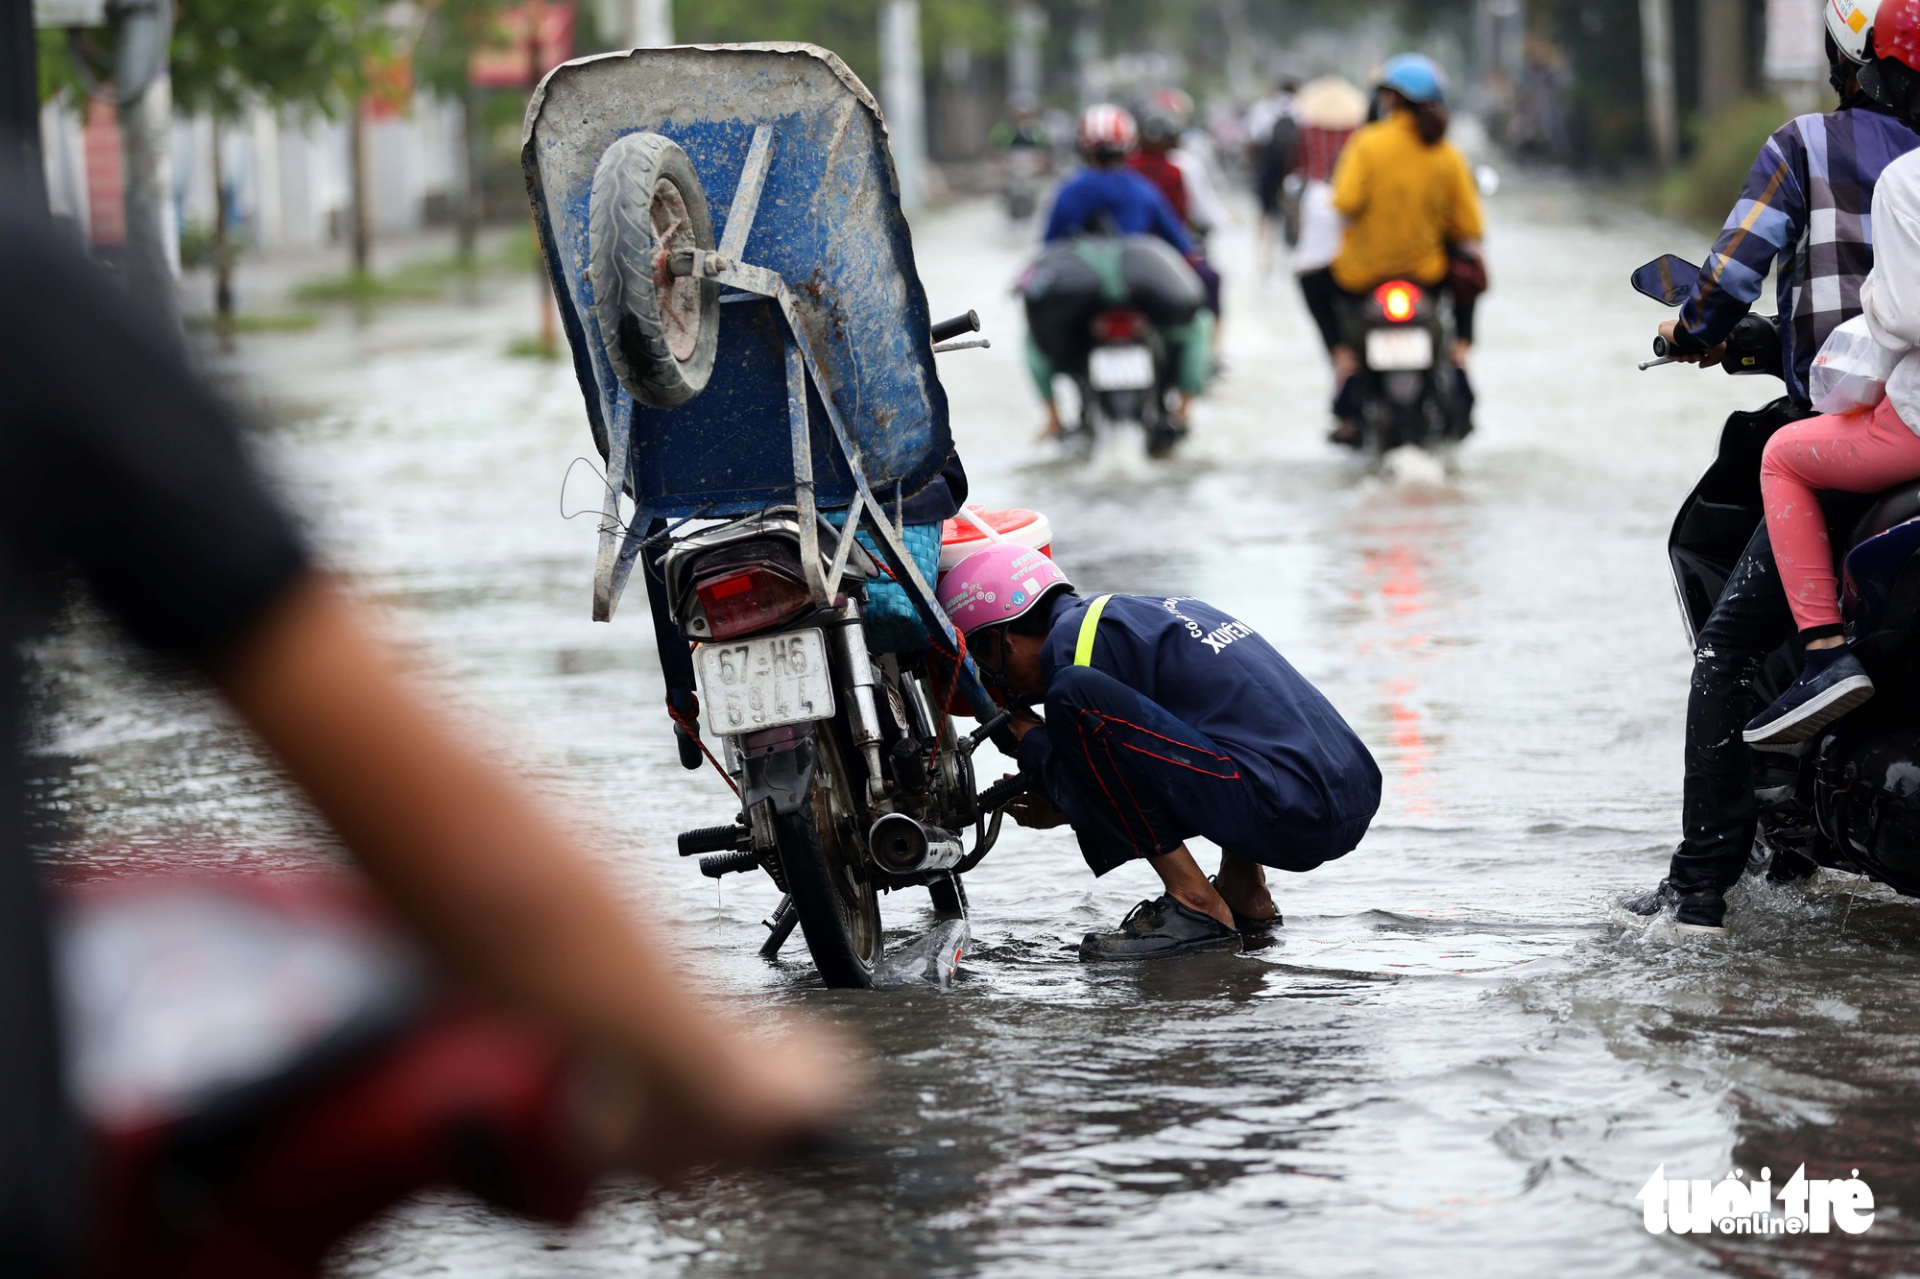 A worker tries to fix his motorbike after its engine stopped in the floodwater.